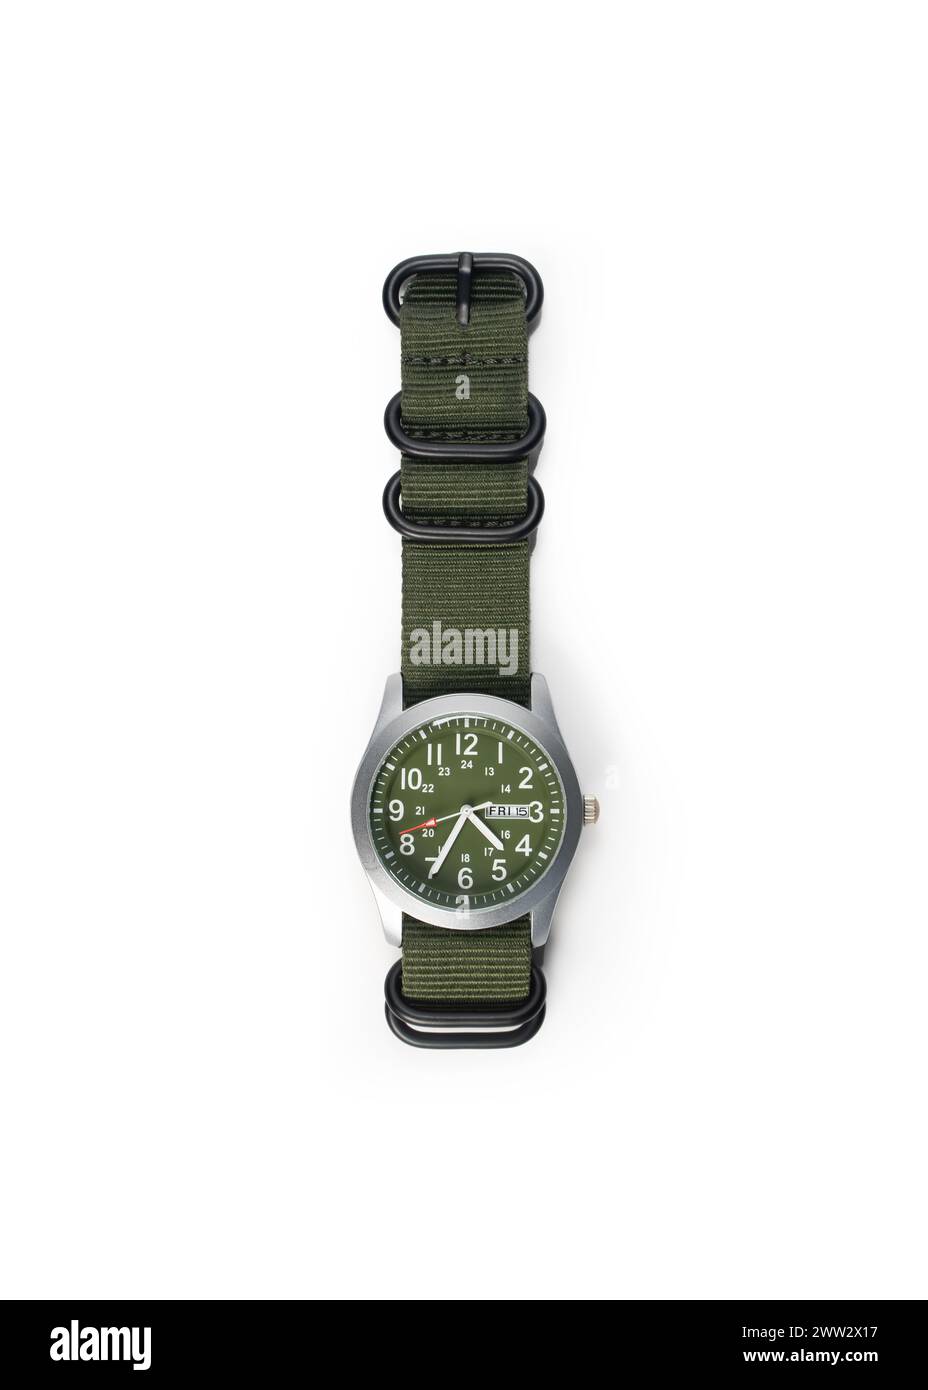 Flat Lay Top View Of A Generic Military Green Field Watch, Isolated On White Background Stock Photo